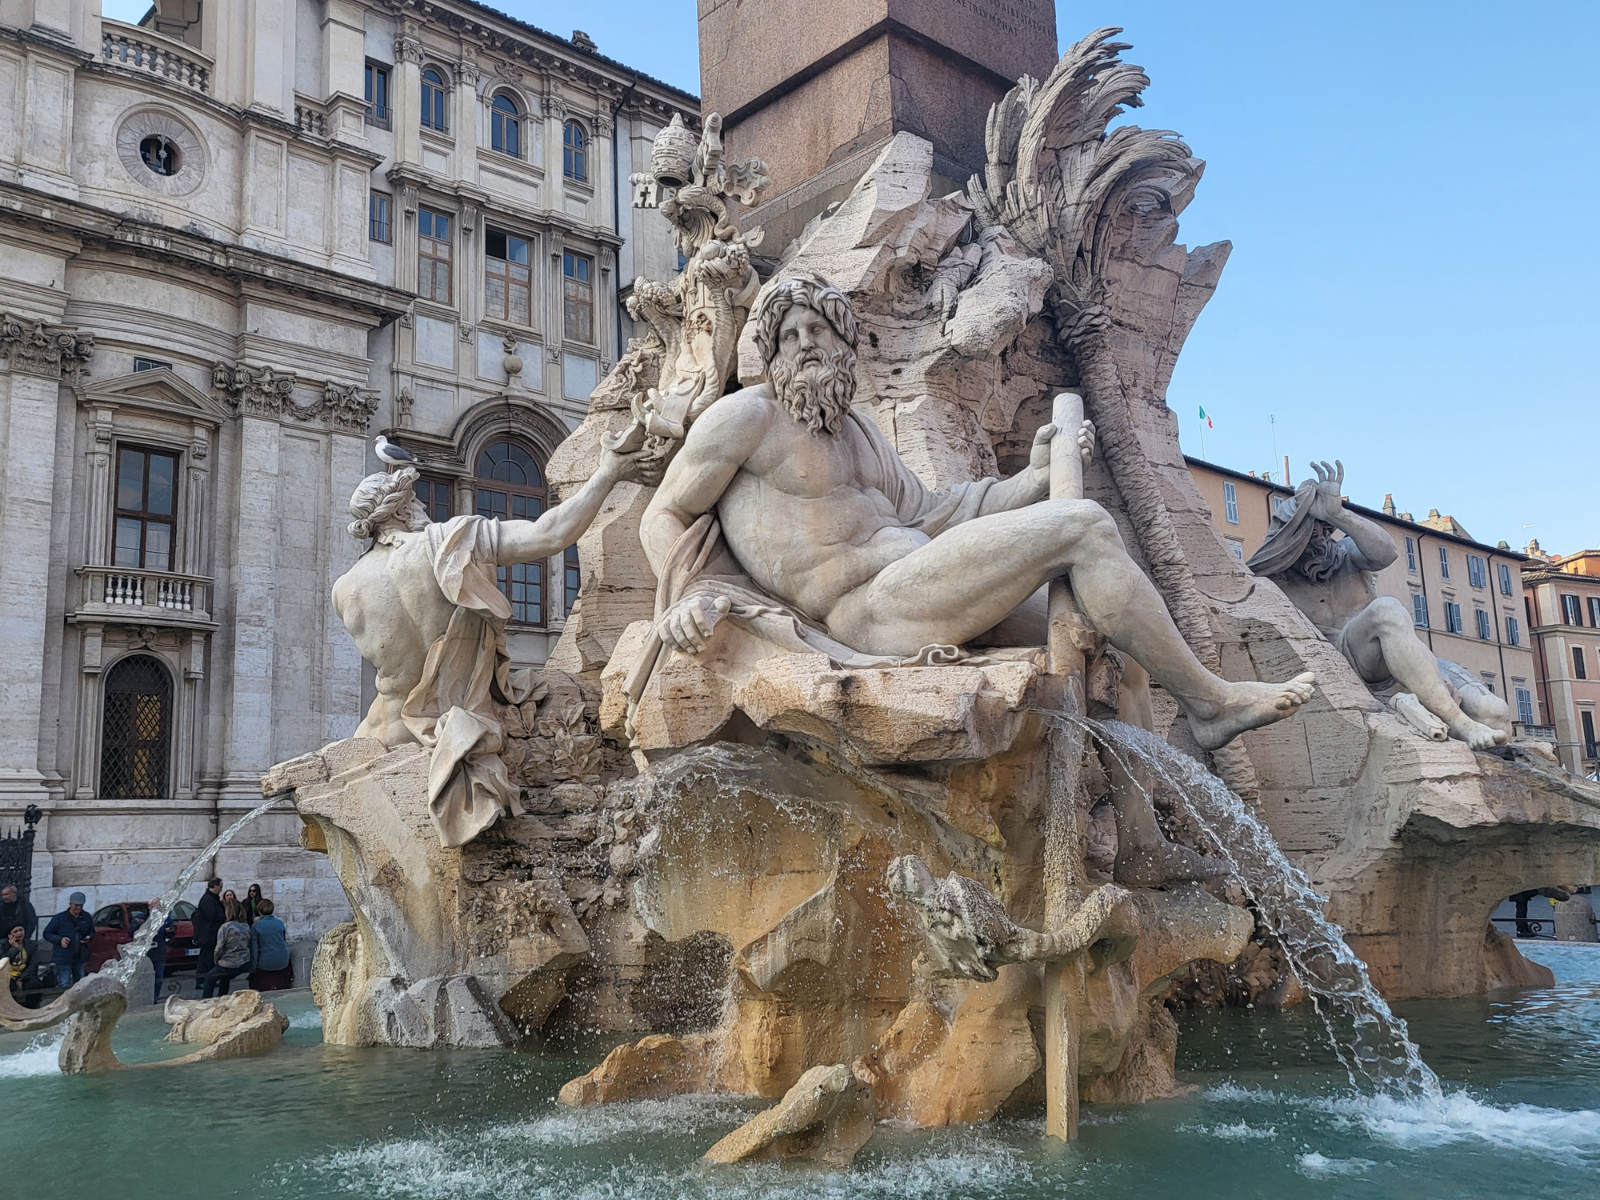 Fountain of the Four Rivers, a scultural masterpiece of the Baroque period